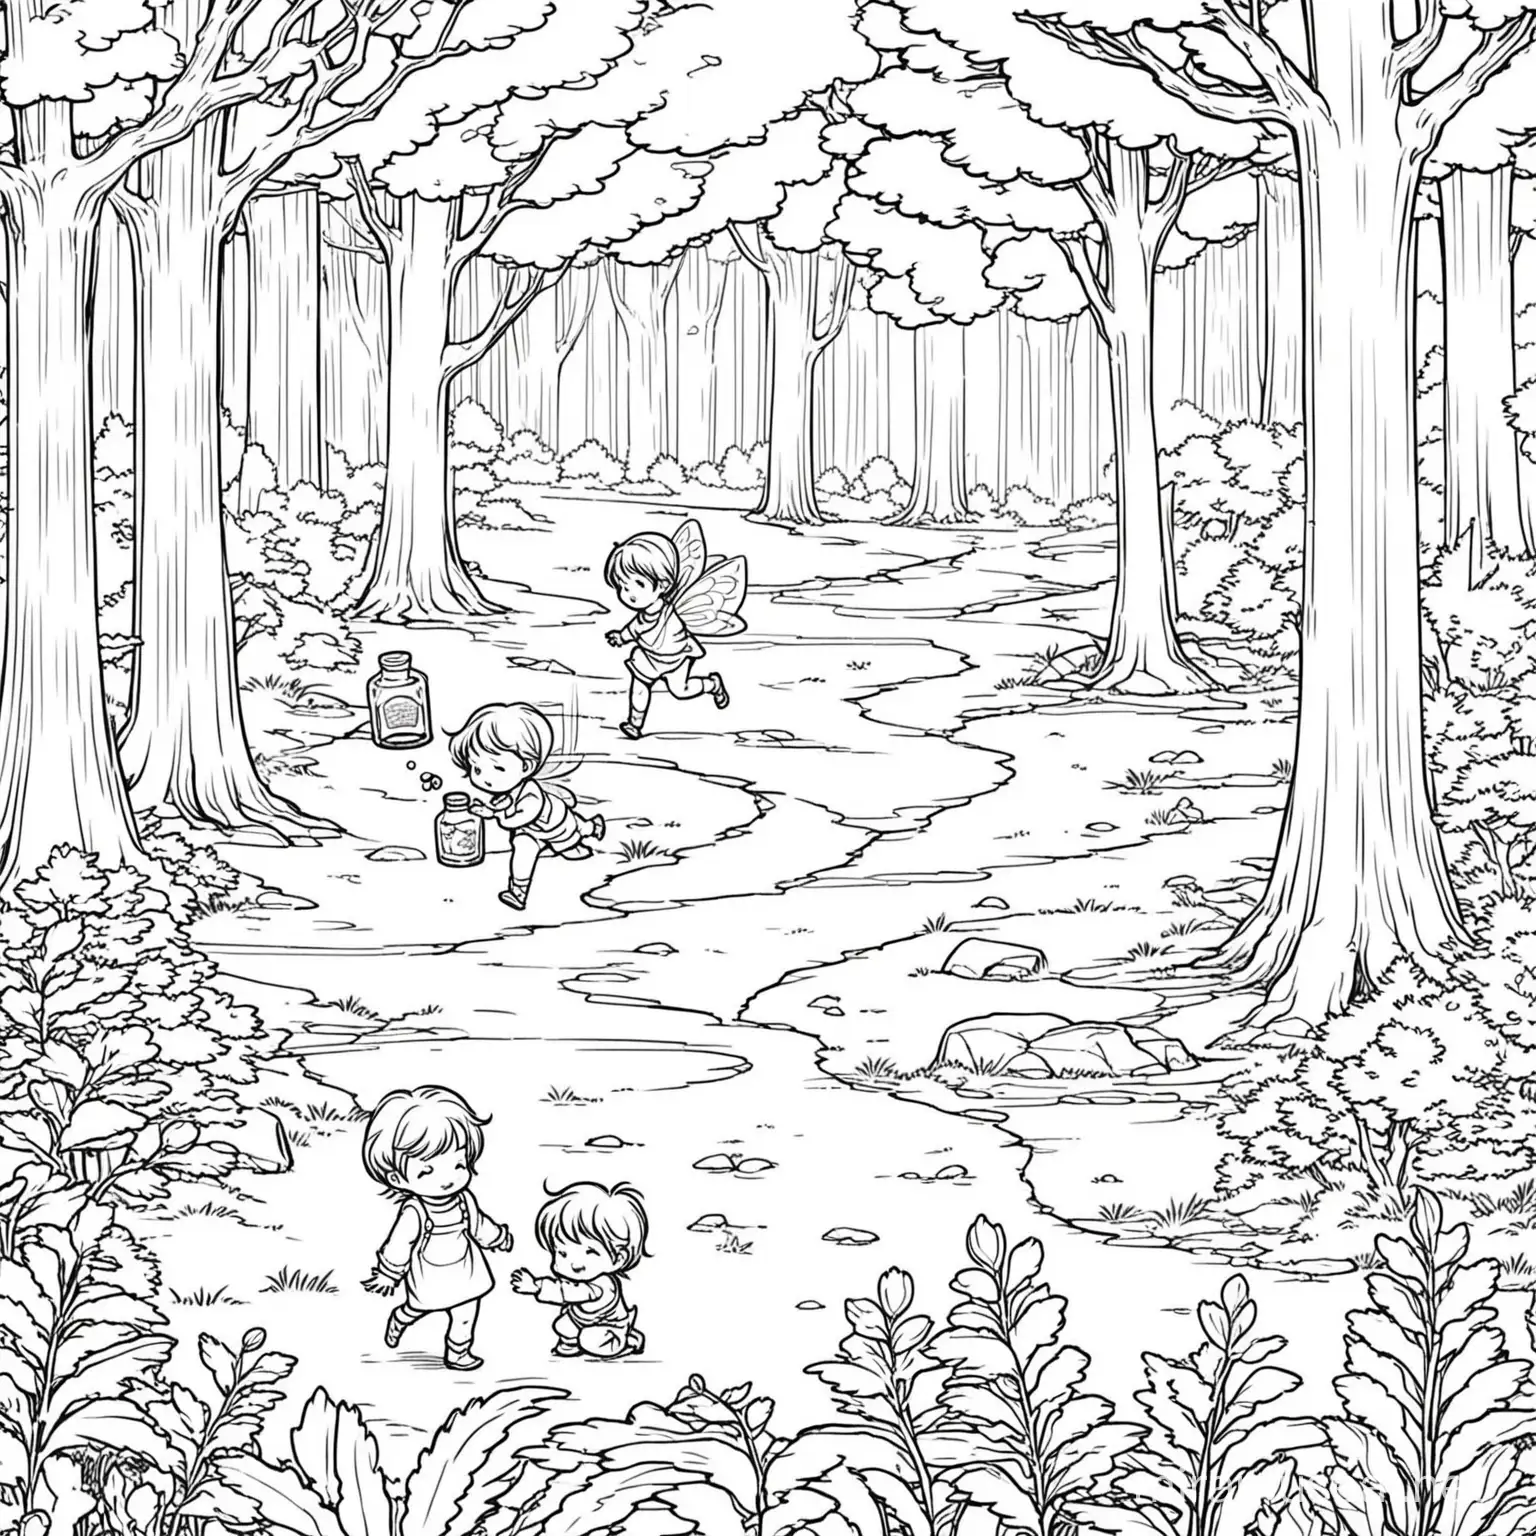 small kids colouring book format,line art  there are evergreens, and the forest is full of forest fairies and sprites, One Sprite is sleeping in a tiny, old square, heinz glass bottle. A 5 year old girl and 2 year old boy find the small bottle. They cannot see the mischievious sprint as he is invisible